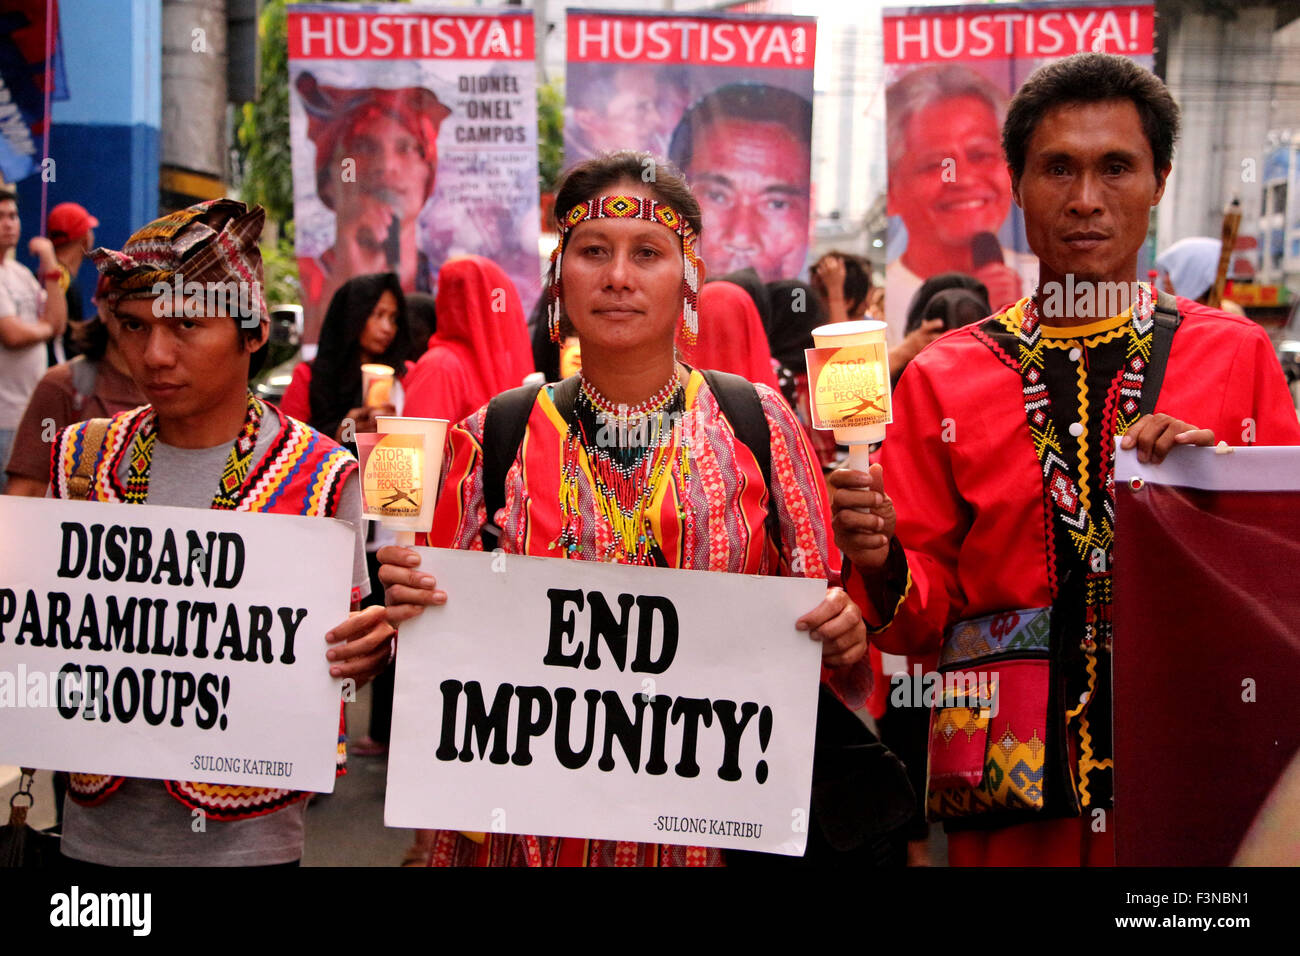 In remembering the 40th day of Lianga, Surigao Del Sur Massacre of Lumads various groups lead by KATRIBU, march to Mendiola wearing red and black veils and carrying torches and candles, calling for justice and to end the cultural impunity under the so-called 'righteous path' and counter -insurgency Oplan Bayanihan of the Pres. Aquino regime. The United Nation's Rapporteur on Internally Displaced Persons, Dr. Chaloka Beyani visited the displaced lumad peoples in Haran Center in Davao City where he expressed concerned over militarization of lumads communities that resulted to human right viola Stock Photo